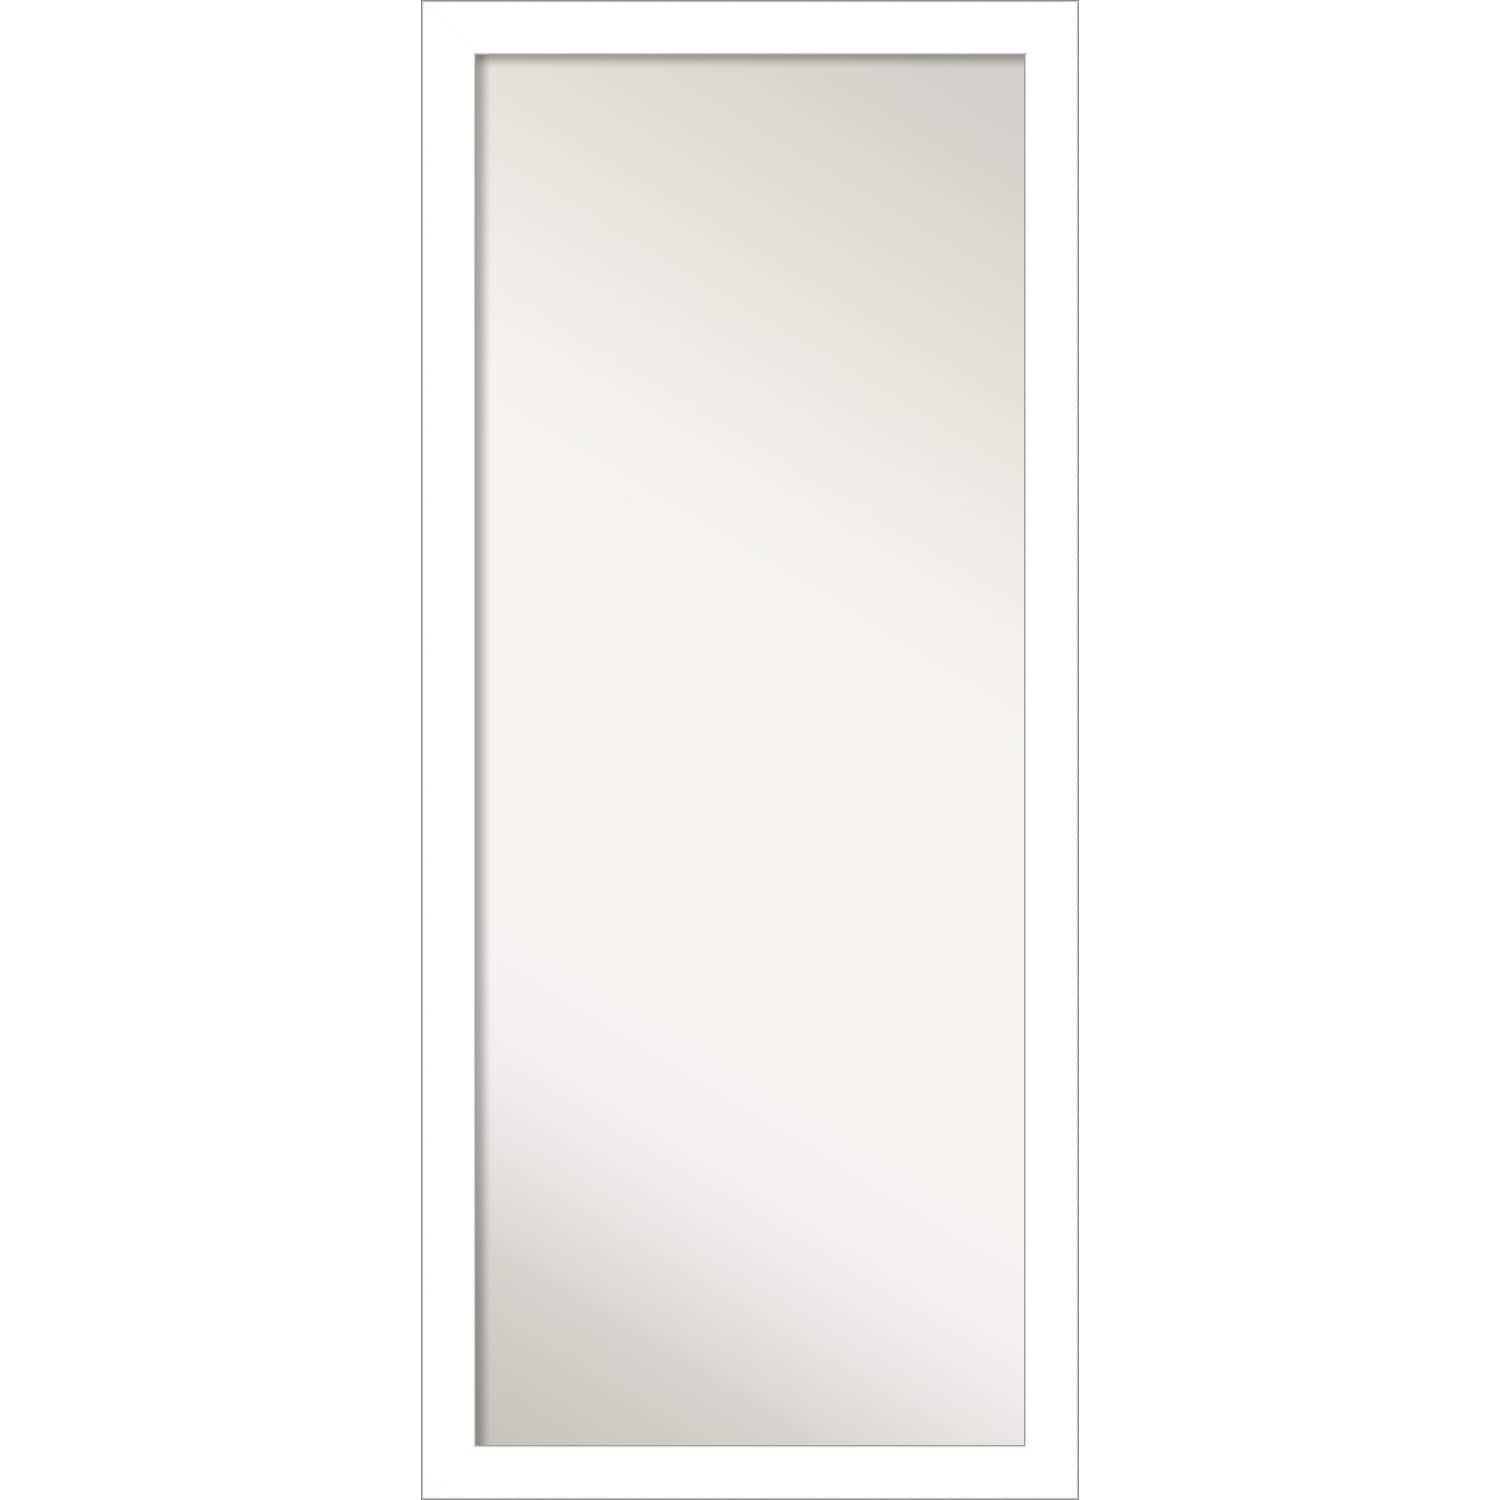 https://ak1.ostkcdn.com/images/products/is/images/direct/7fd8853051cd395c9fb8768bf0dd3db90cae6adf/Non-Beveled-Wood-Full-Length-Floor-Leaner-Mirror---Wedge-White-Frame.jpg